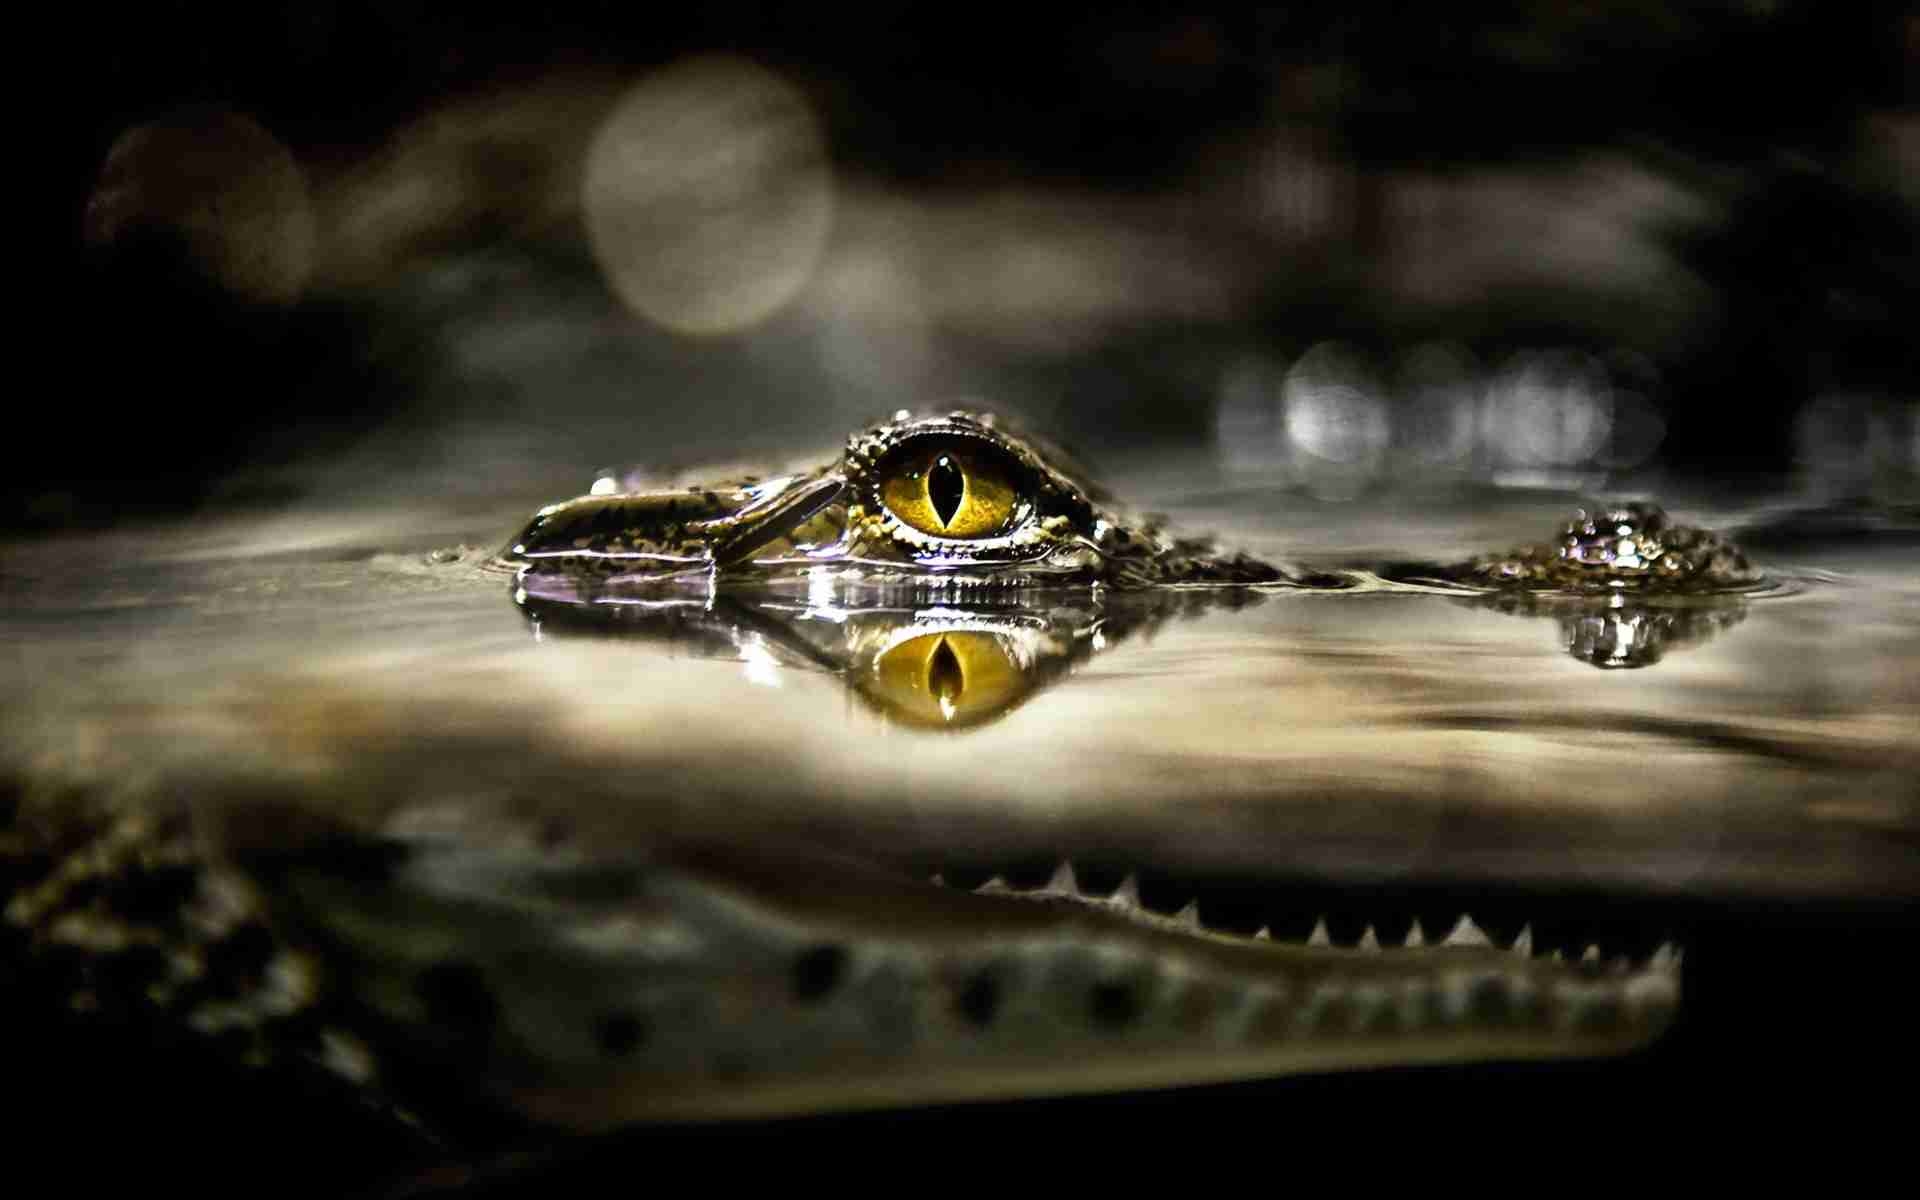 Free photo A crocodile watches from underwater